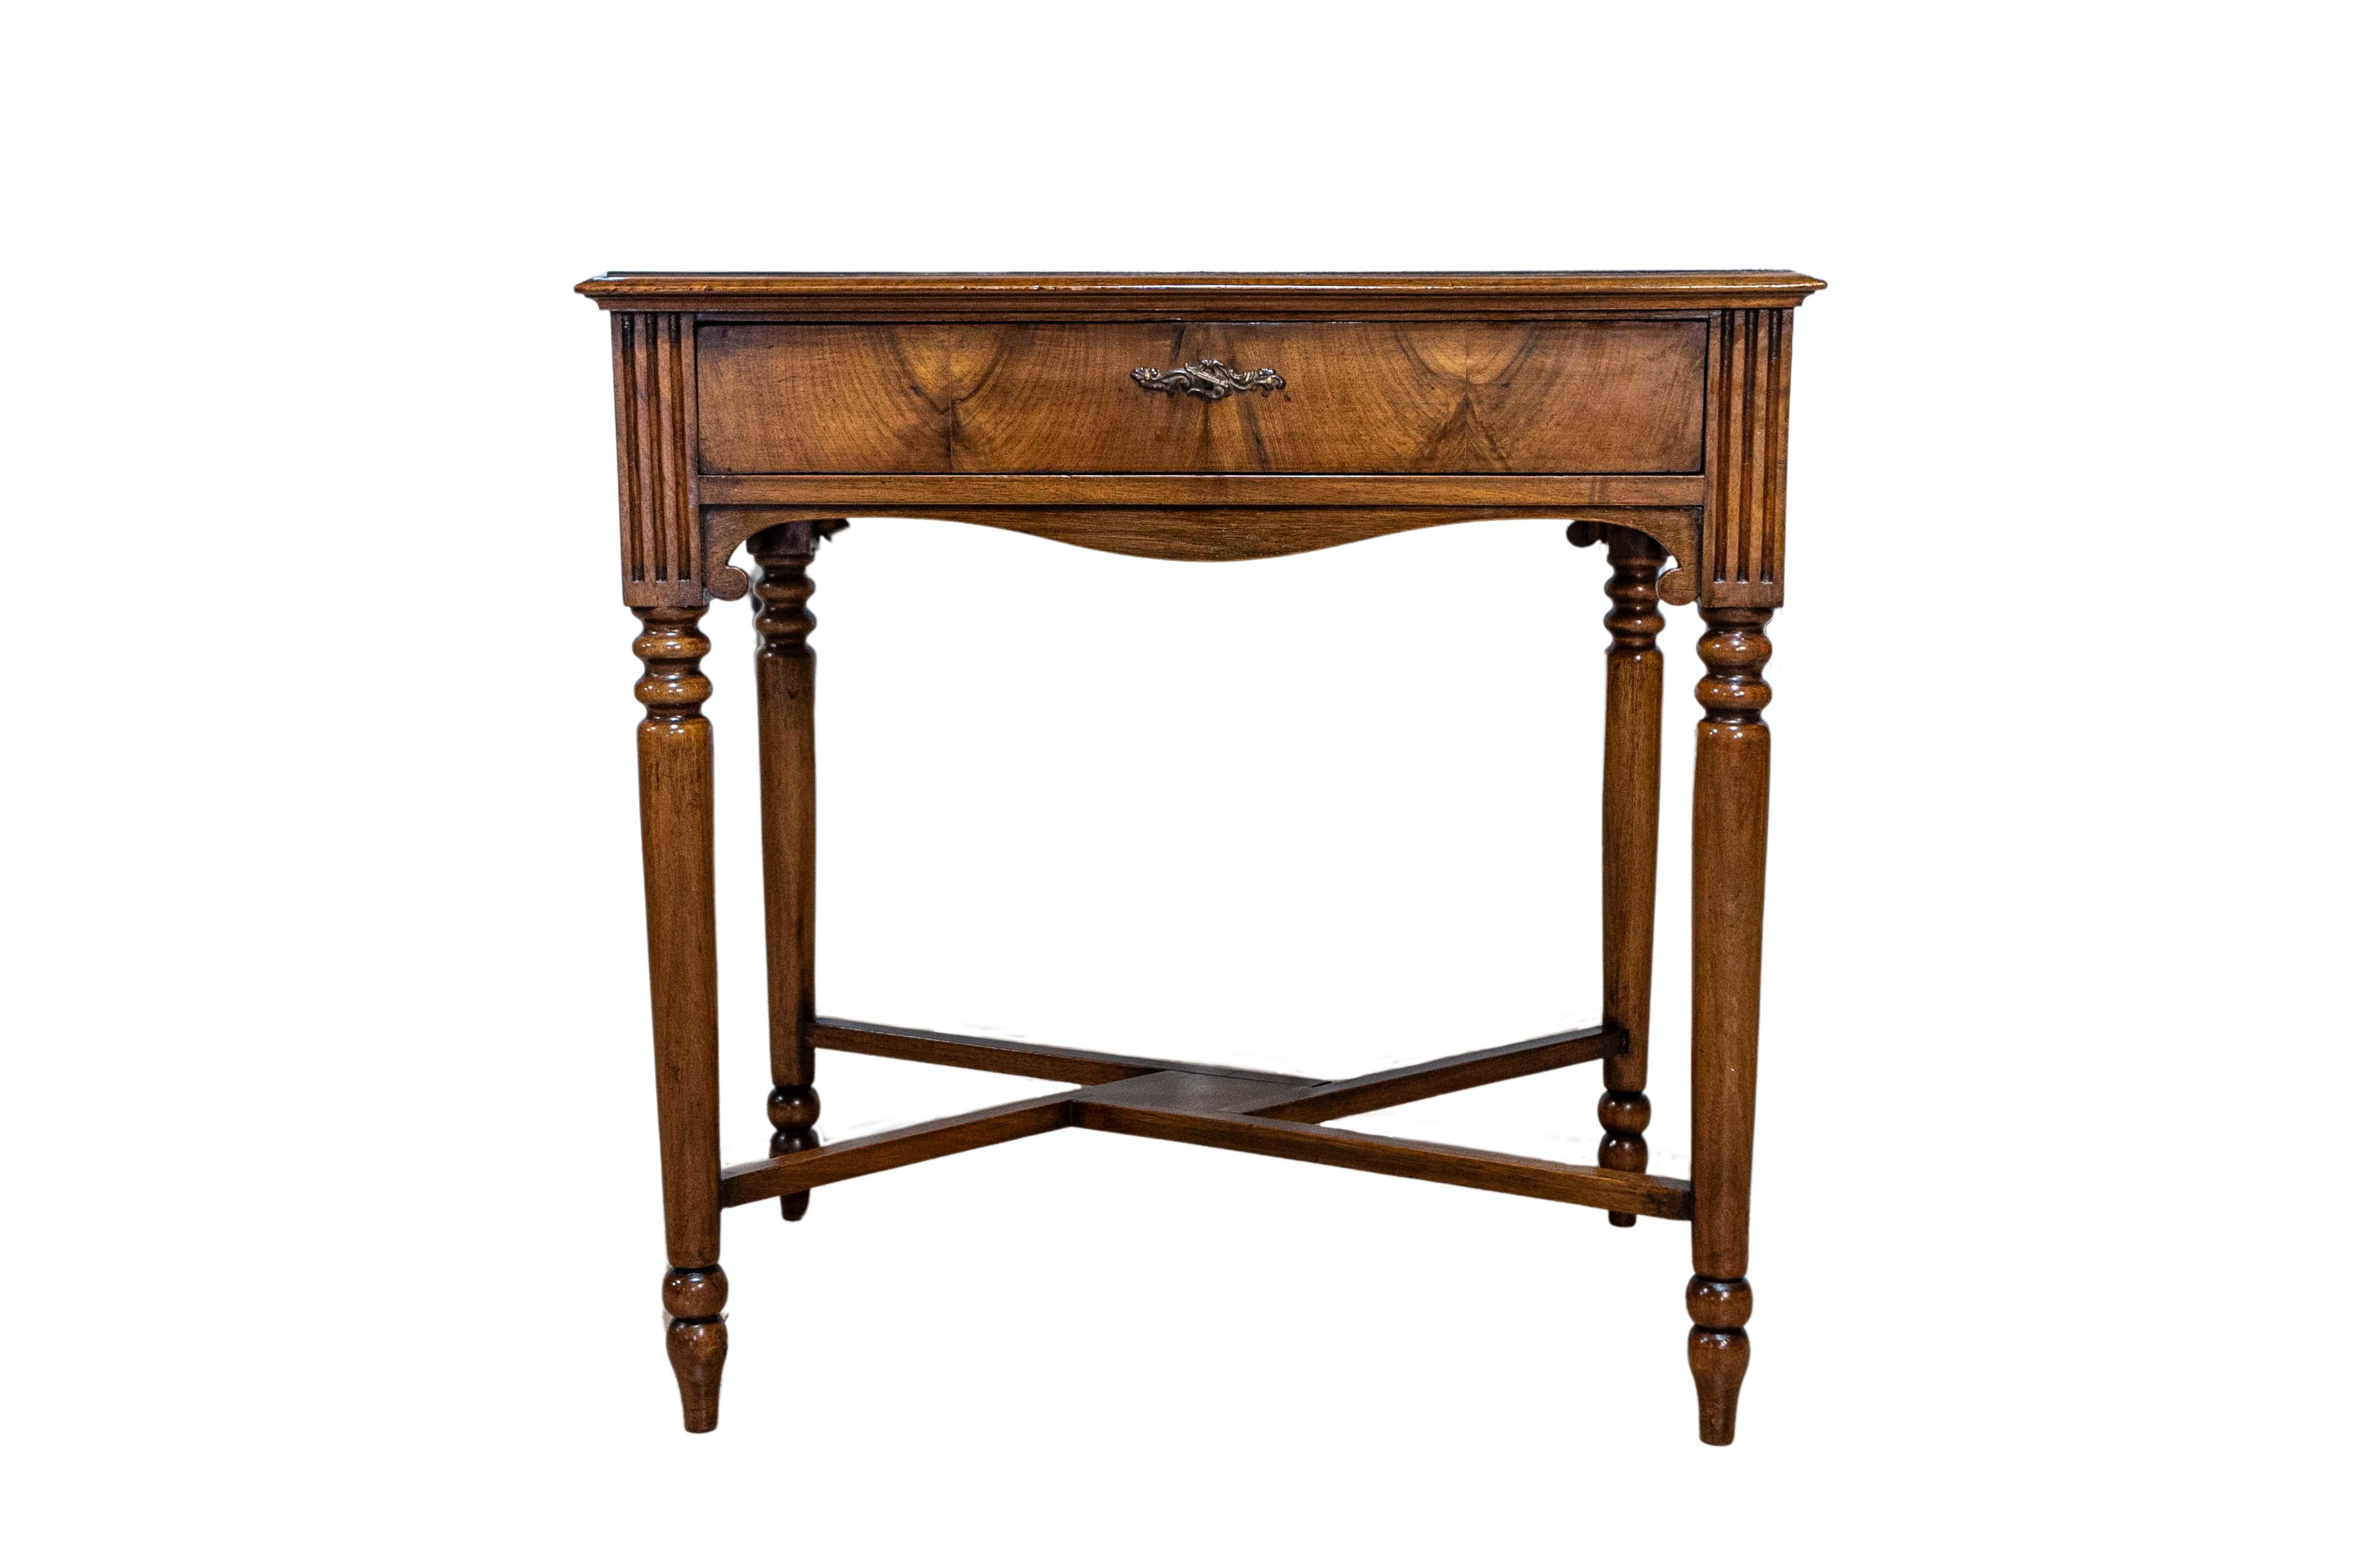 An Italian walnut and mahogany game table from the 19th century with marquetry checkerboard top partitioned drawer, fluted knees, cylindrical tapering legs and X-Form cross stretcher. This 19th-century Italian walnut and mahogany game table marries